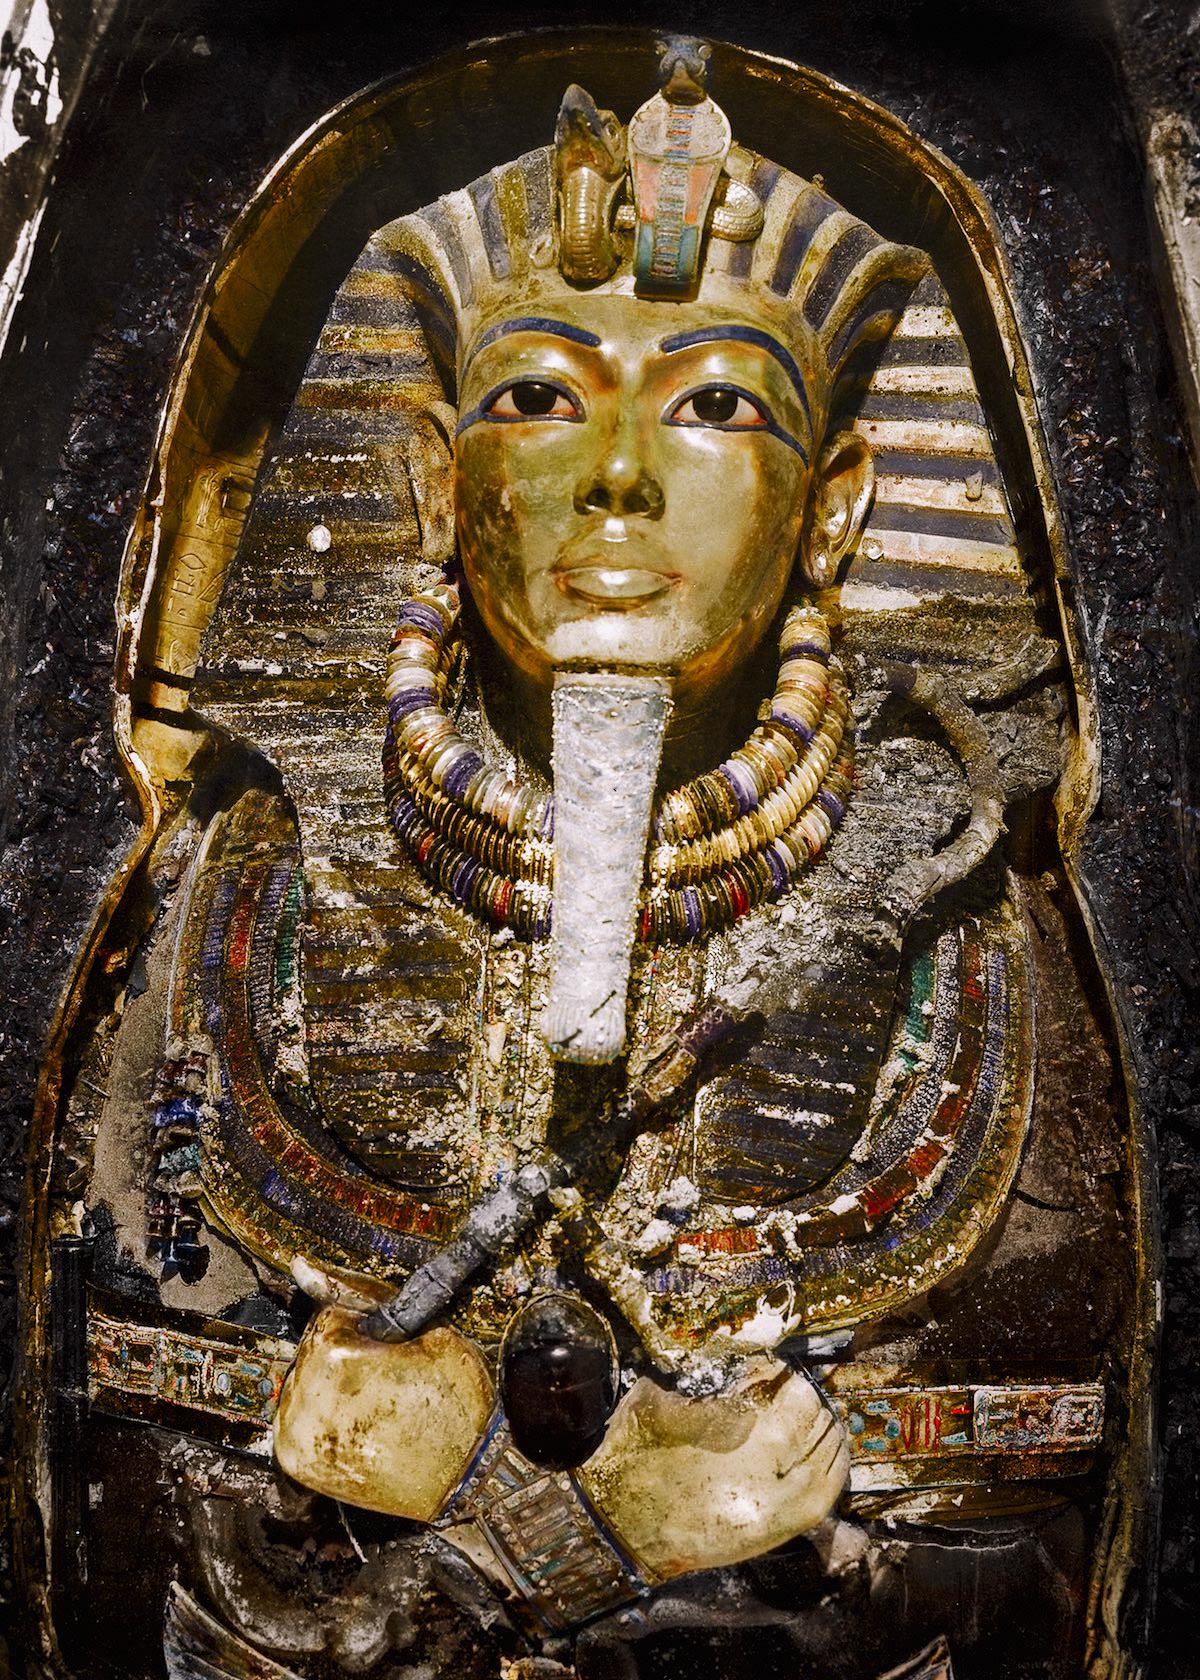 The Opening Of King Tut S Tomb Shown In Stunning Colorized Photos Open Culture